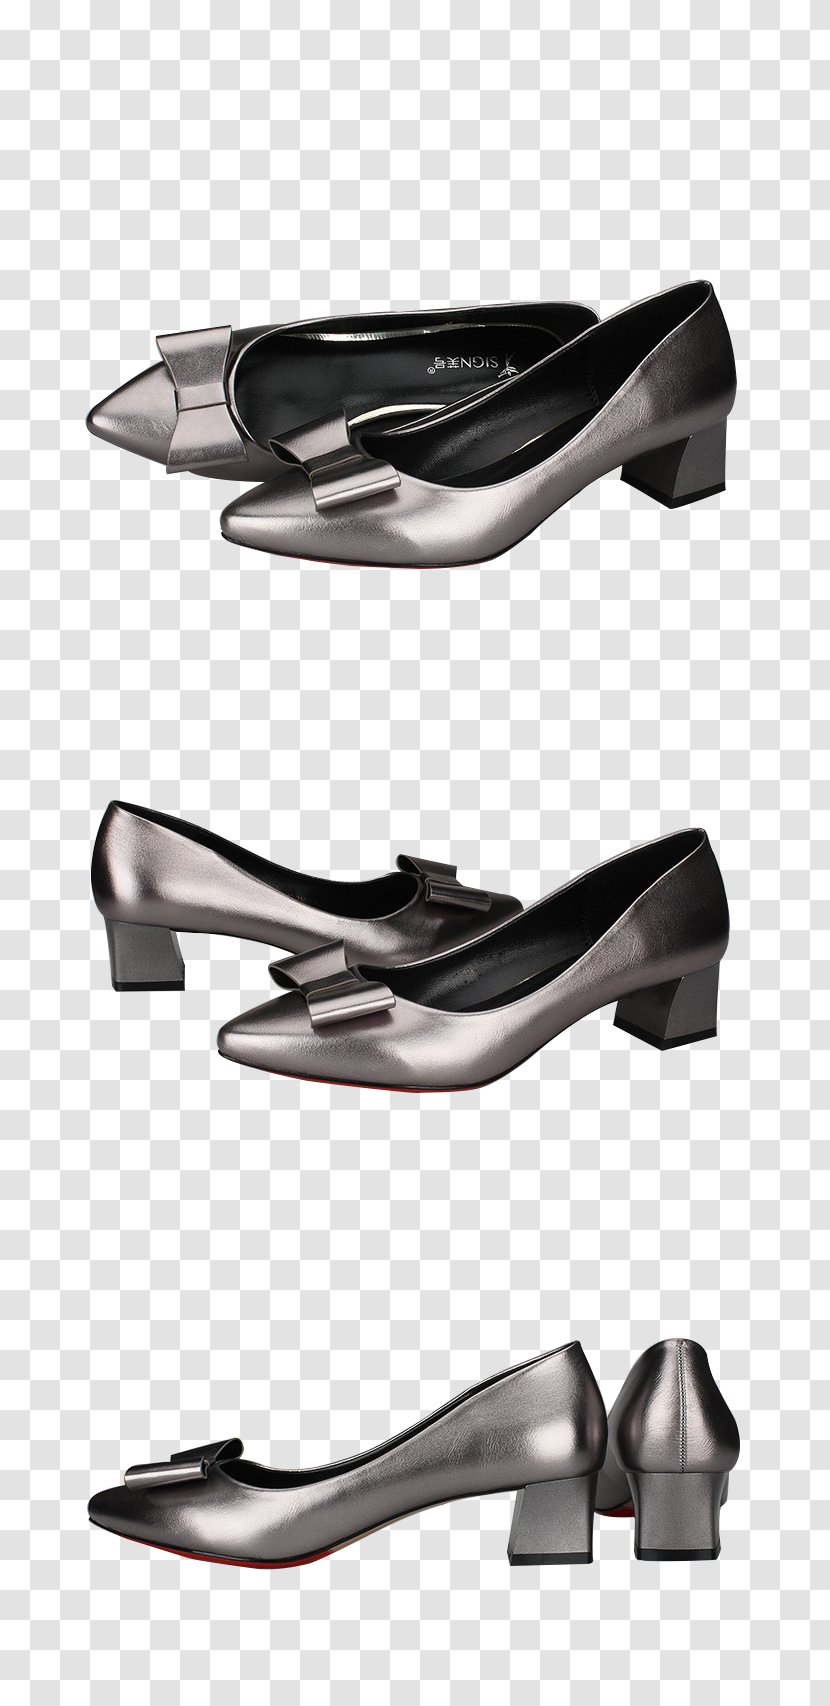 Ballet Flat Shoe High-heeled Footwear - Boot - Silver Small Shoes At All Angles Picture Transparent PNG